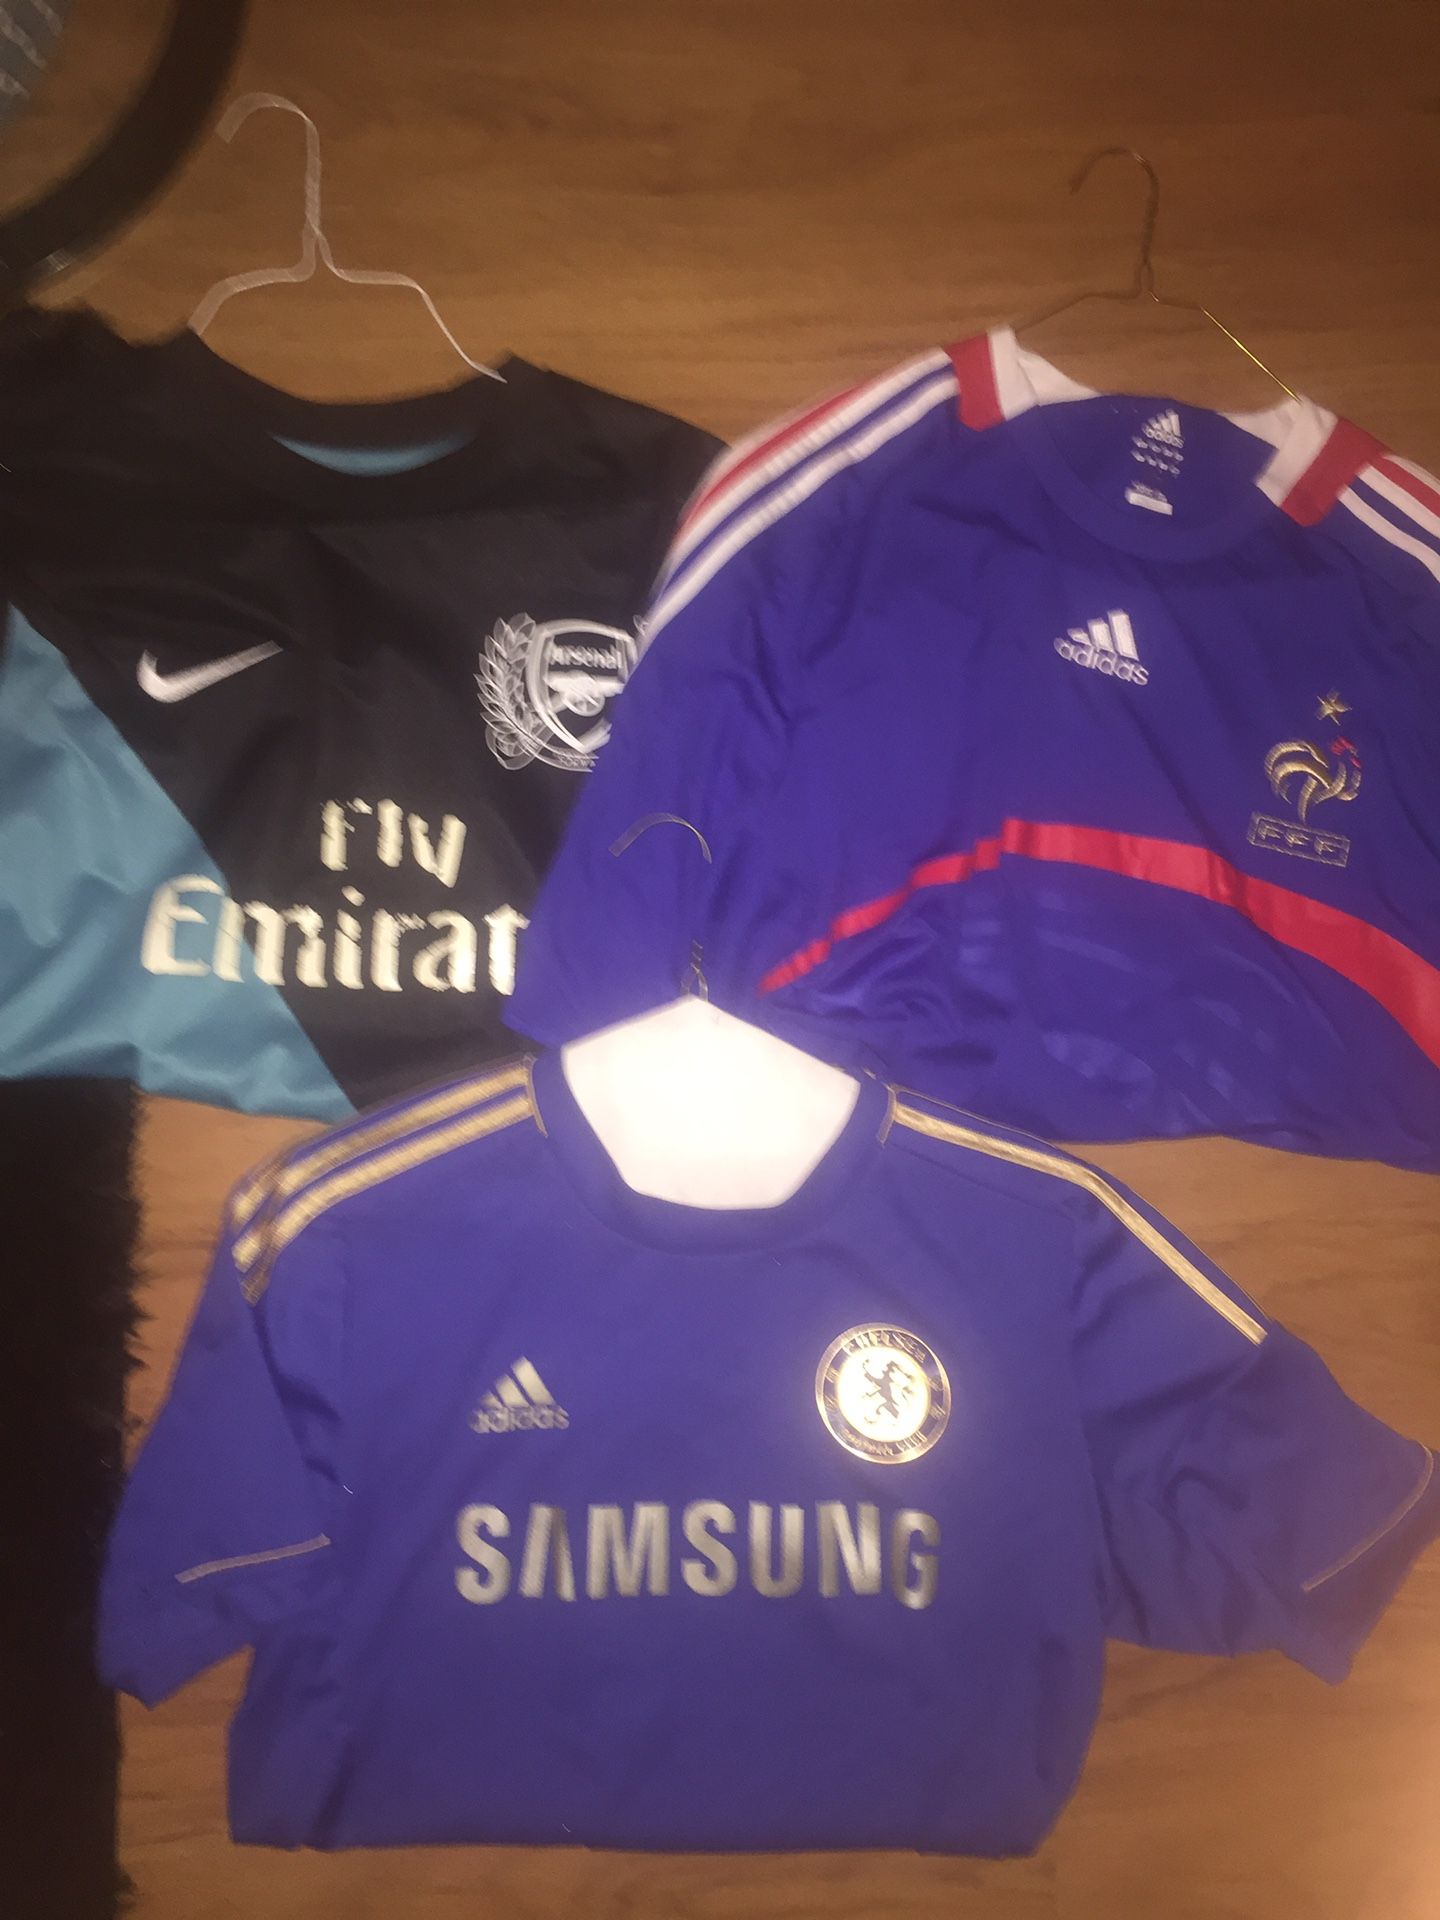 Throwback Nike Adidas France, Chelsea, Arsenal Soccer Jersey